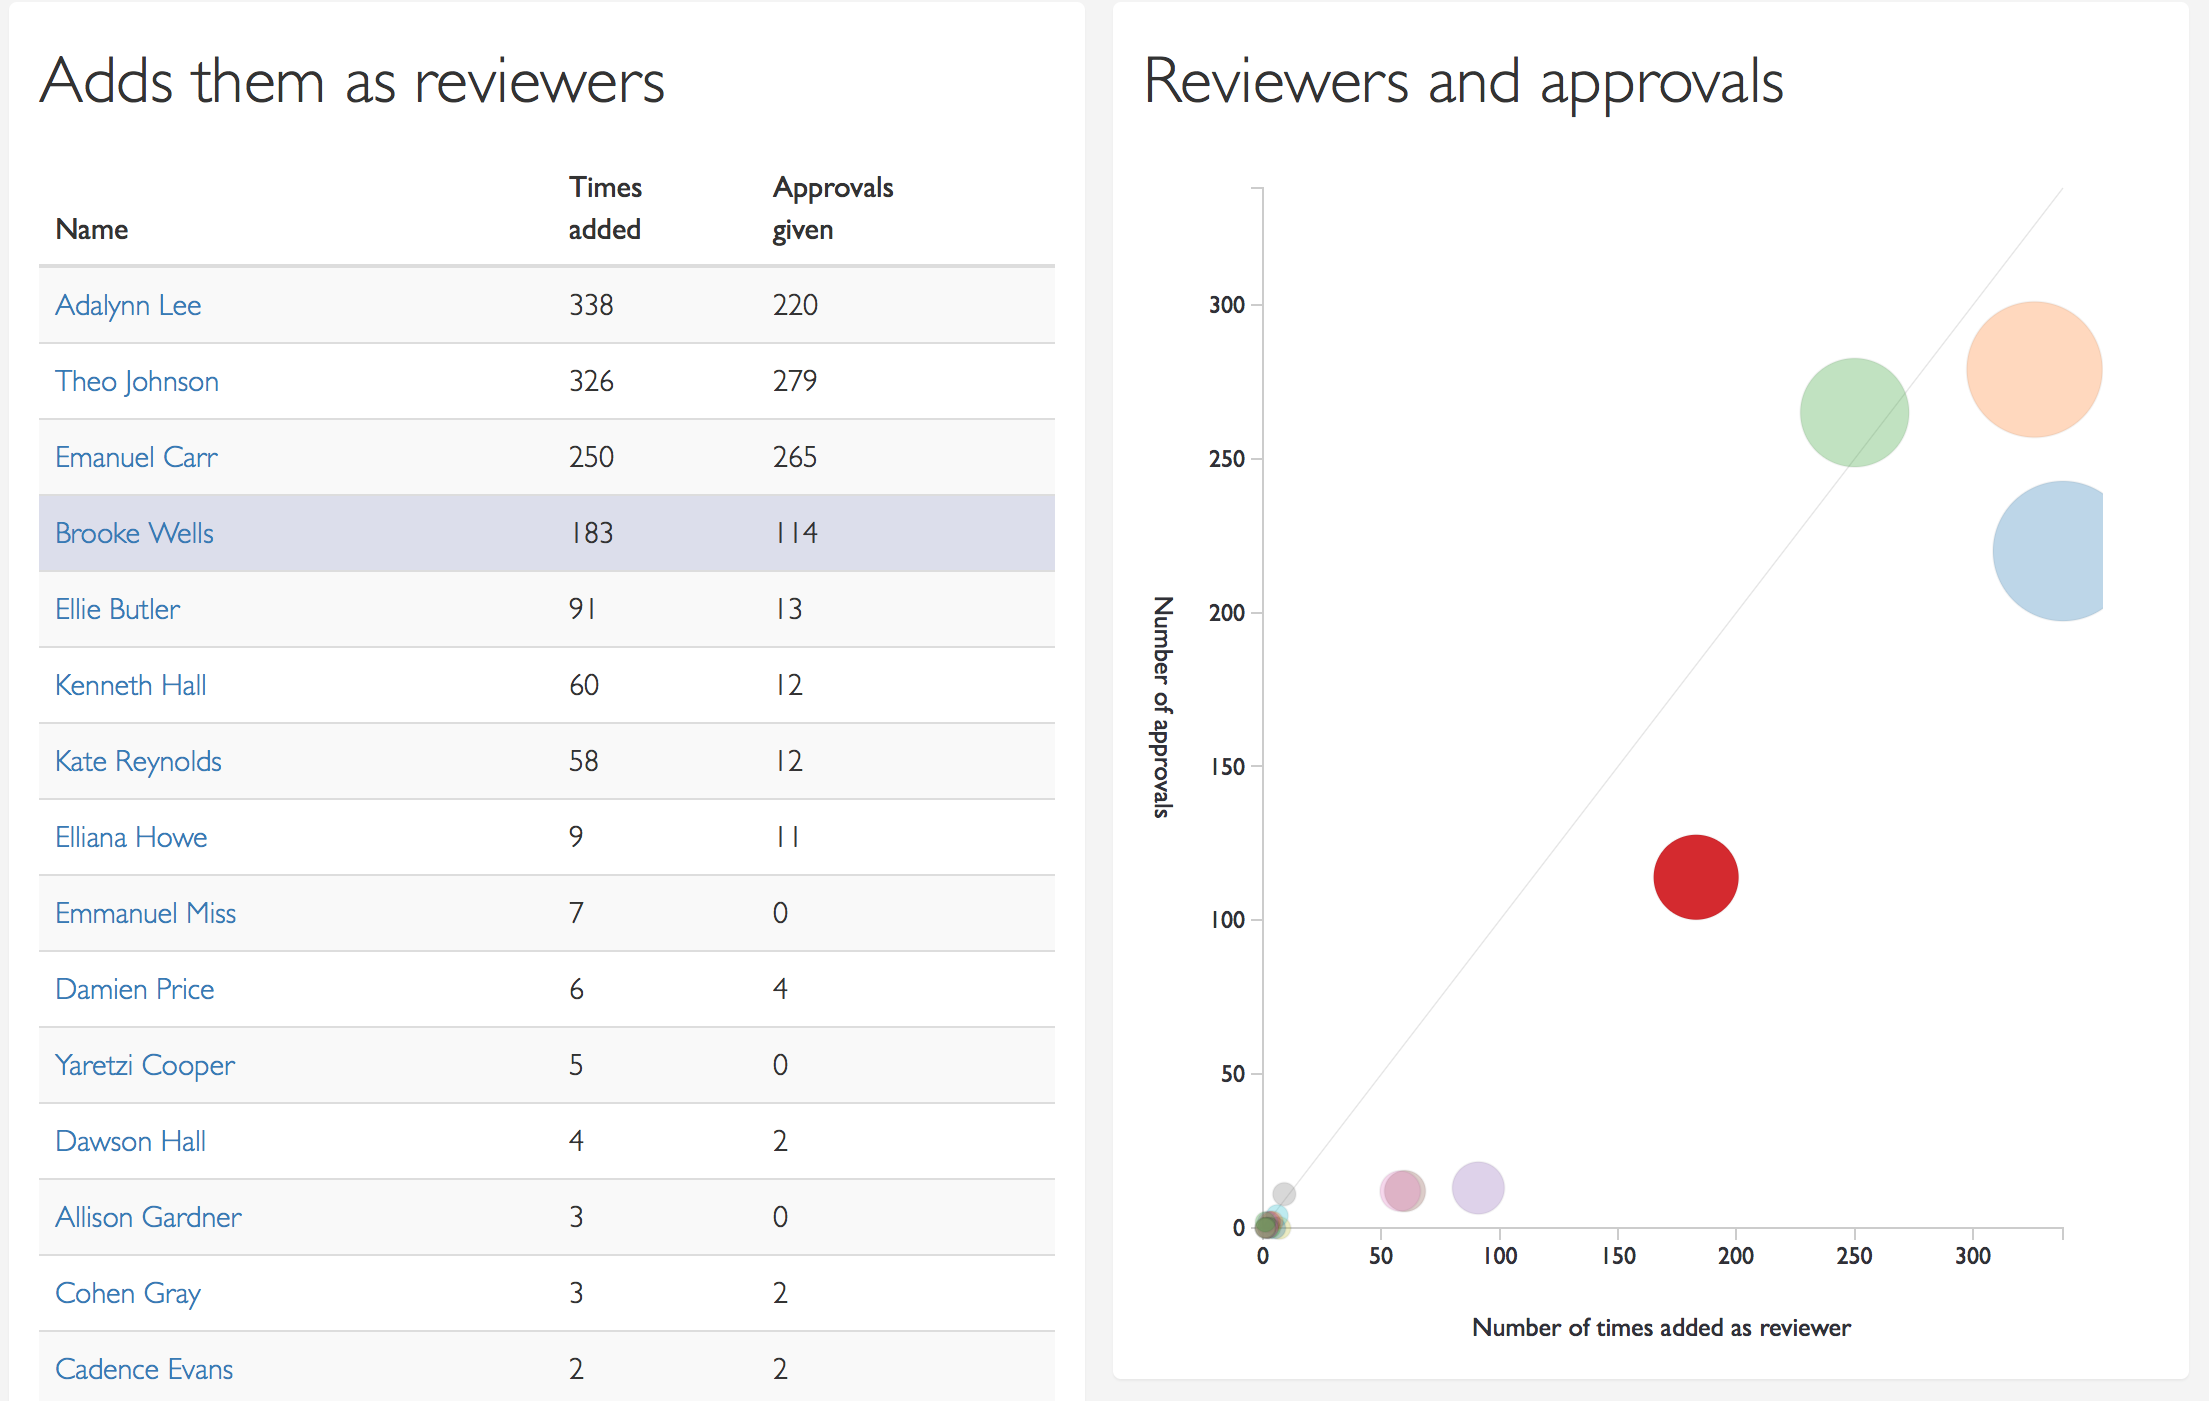 A chart and table showing who this user adds as a reviewer, and how often they approve the changes